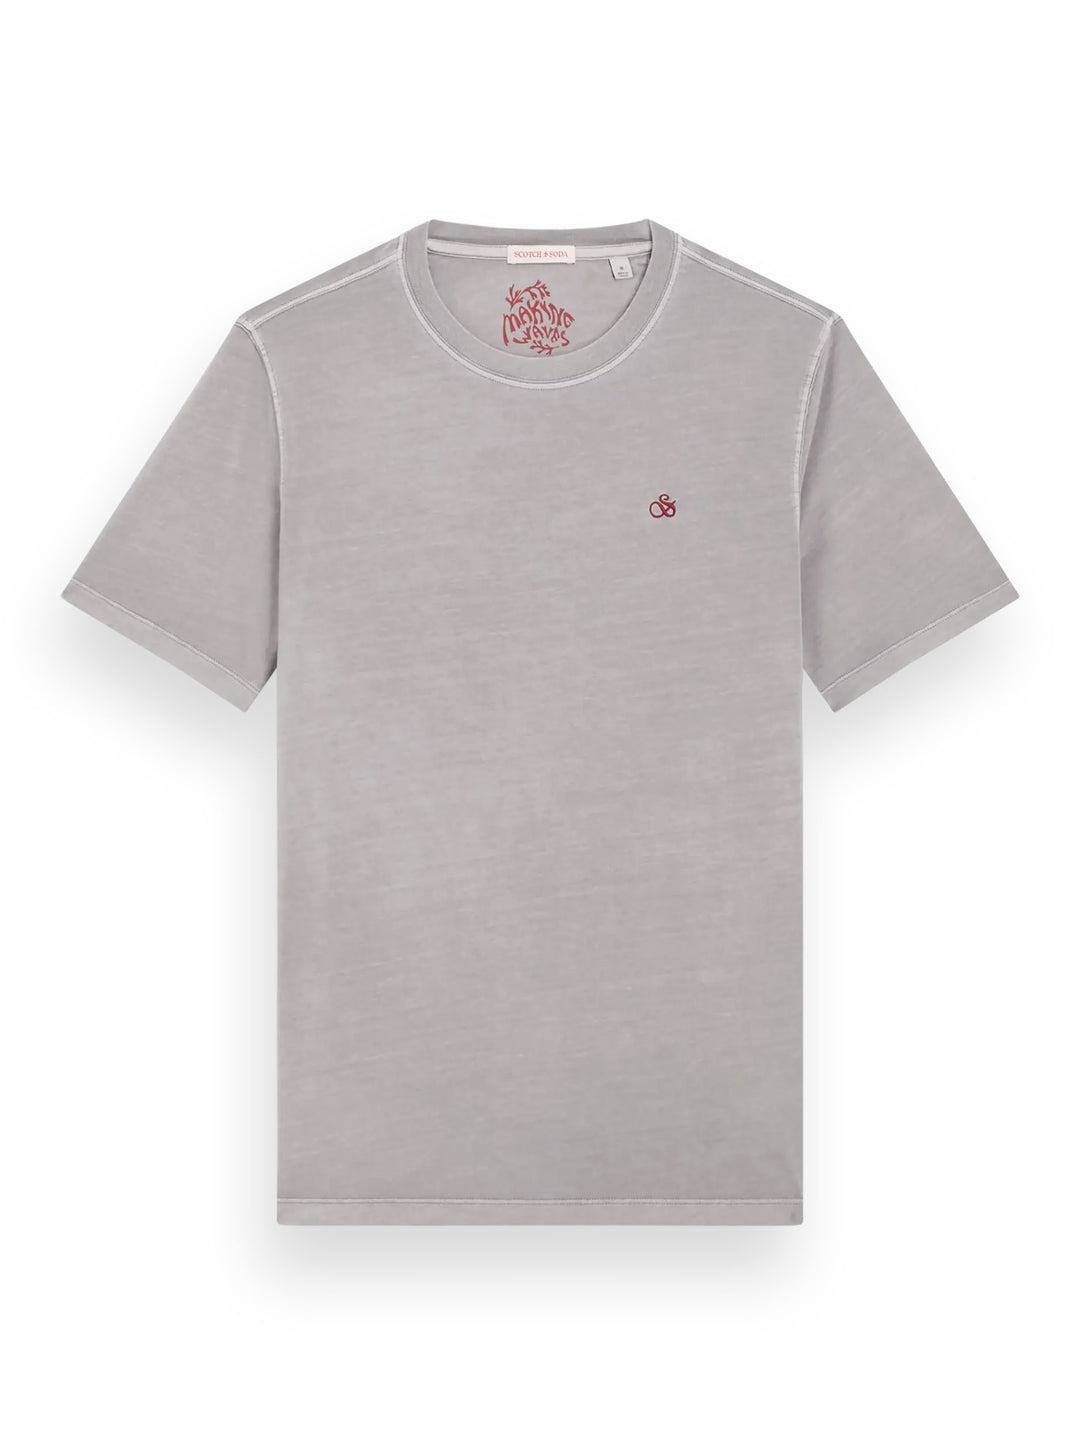 Garment Dye Crewneck Tee with Logo in Seal Grey | Buster McGee